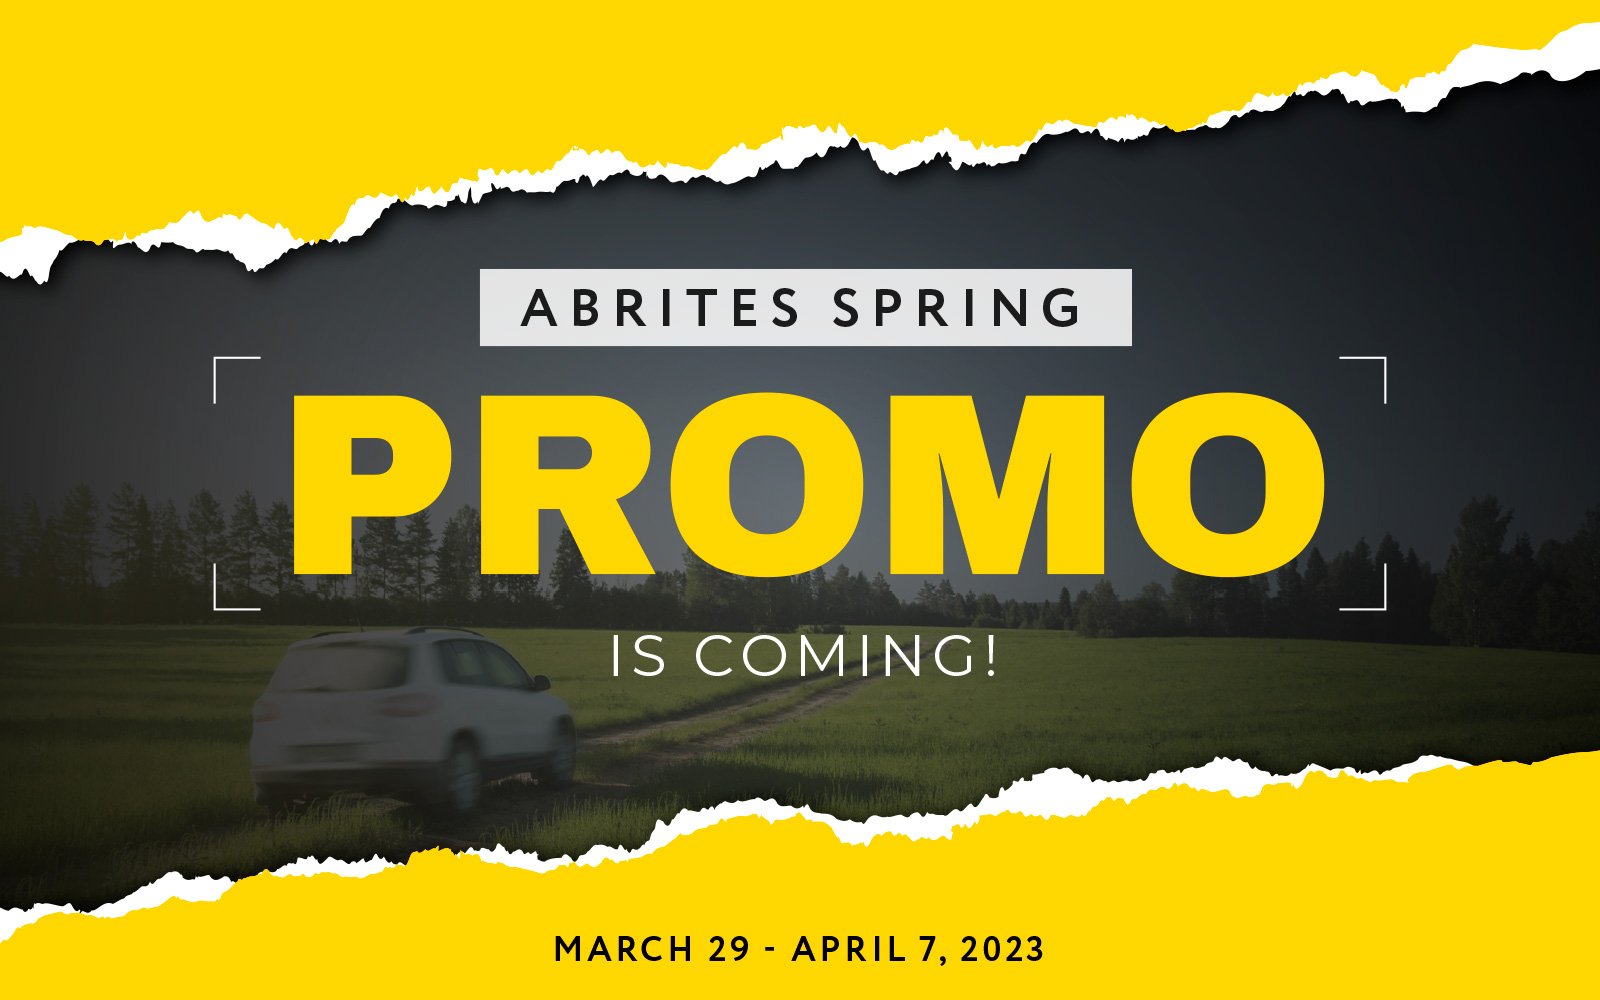 THE ABRITES SPRING PROMO IS COMING!